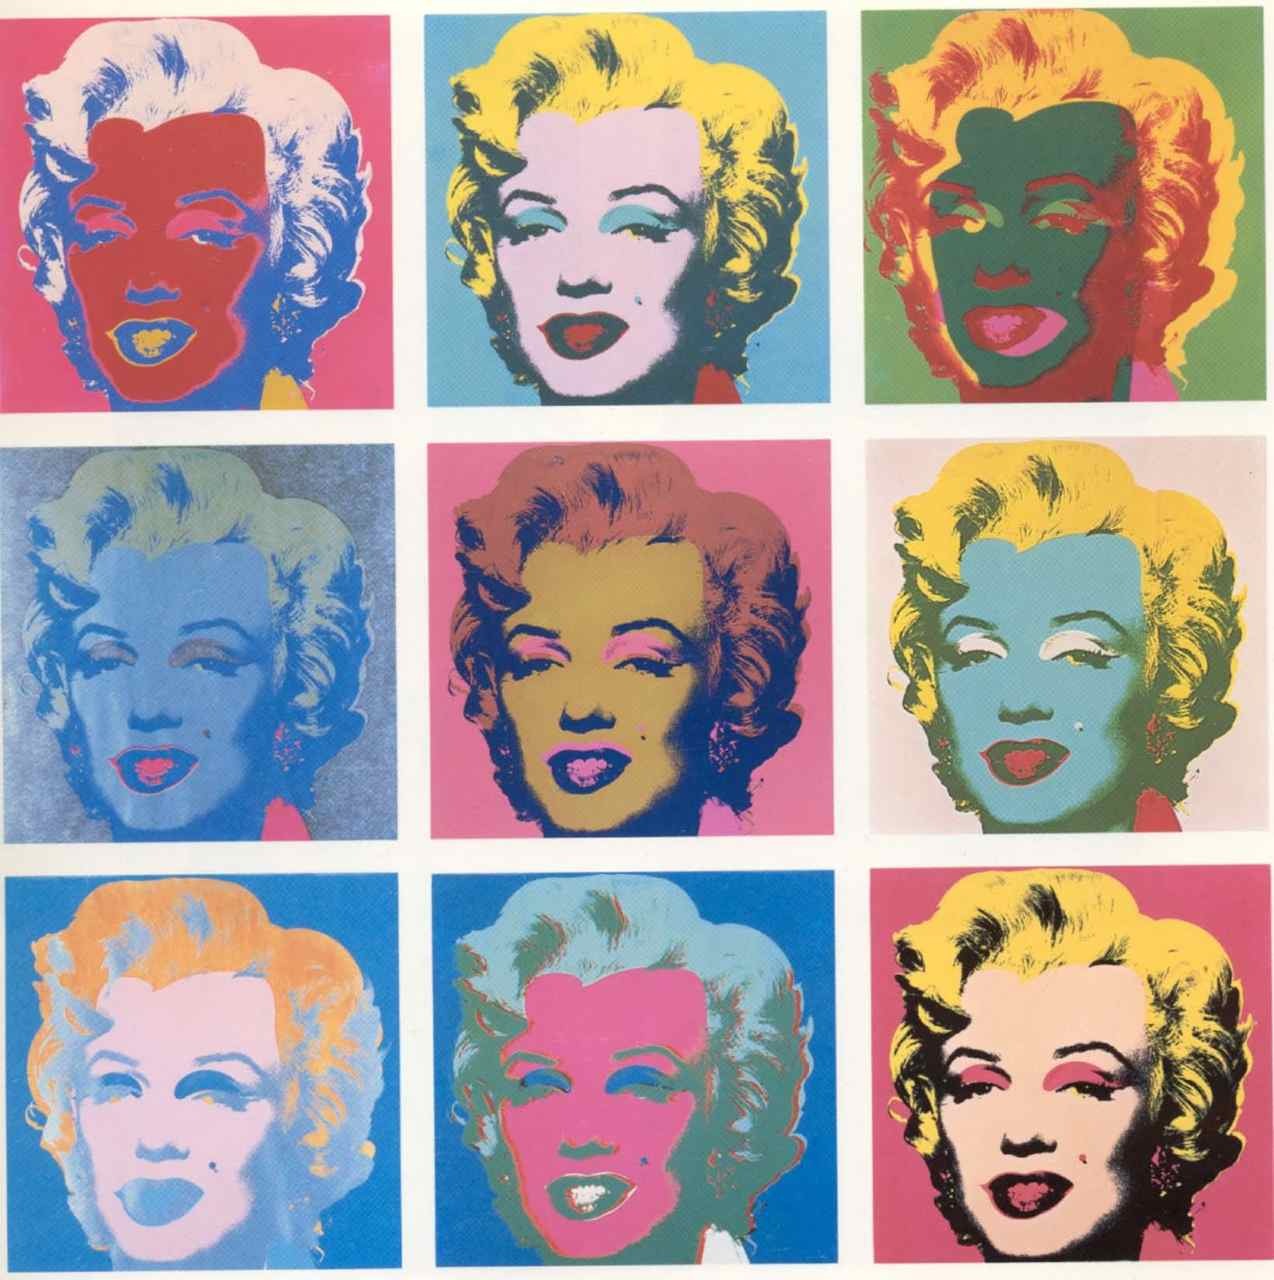 Andy Warhol (1928-1987), Marilyn Monroe (1926-1962), 1962, Screen PrintPlease ioin Pin Up (A Documentary) on  Facebook, Pinterest and Twitter